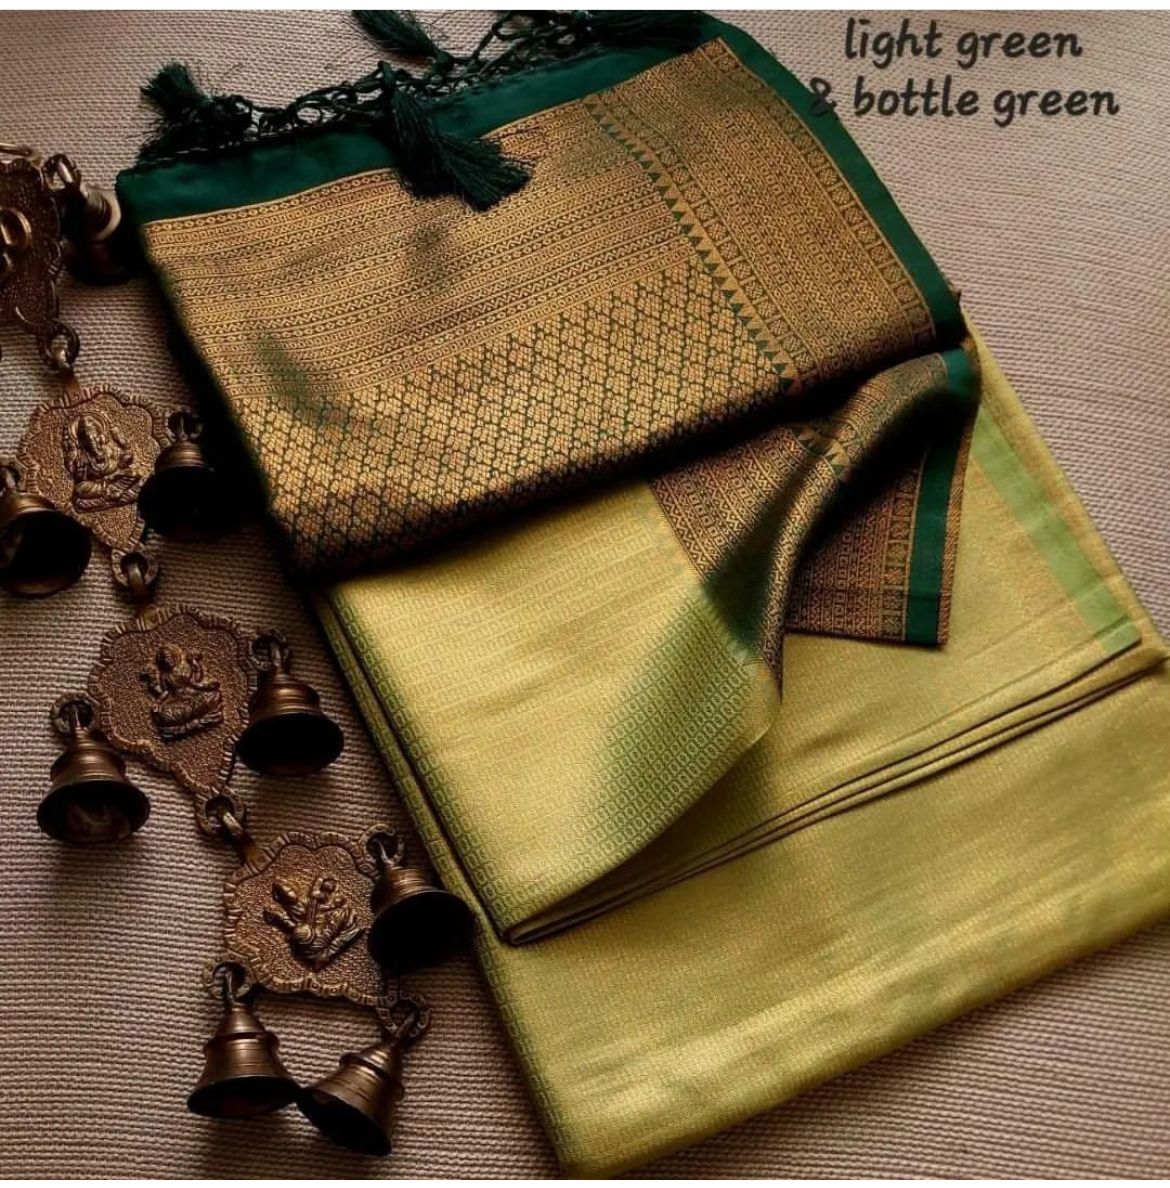 The Ultimate Collection of Full 4K Pattu Saree Images – Over 999+ Amazing Designs